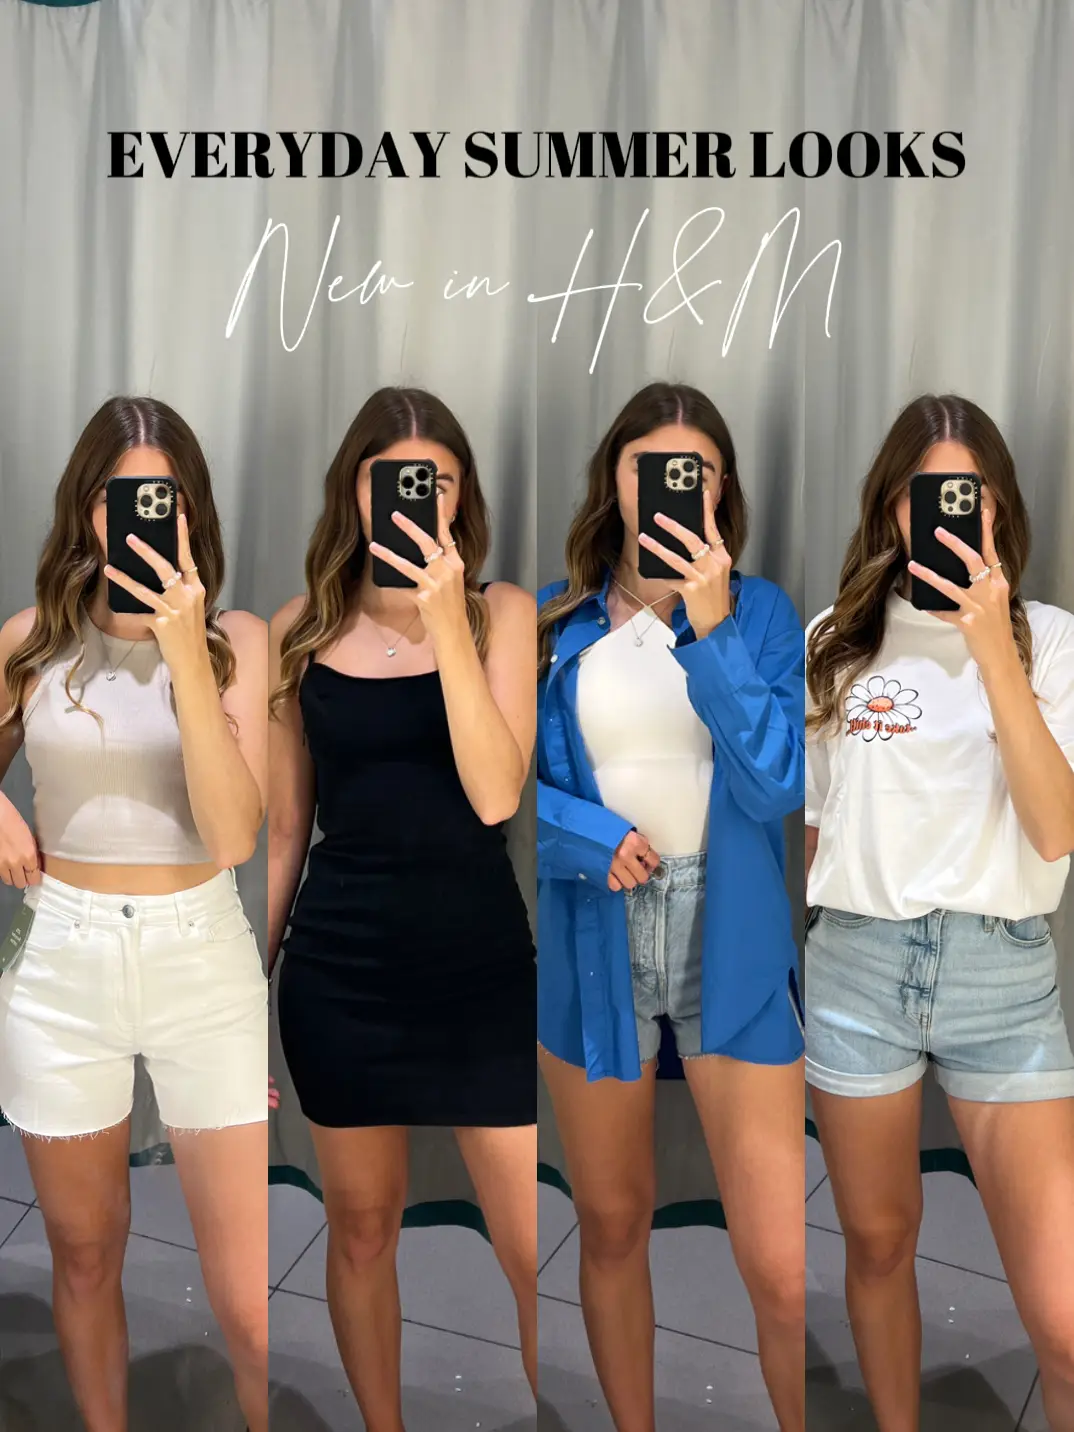 EVERYDAY SUMMER LOOKS FROM H&M, Gallery posted by Lia Sophie